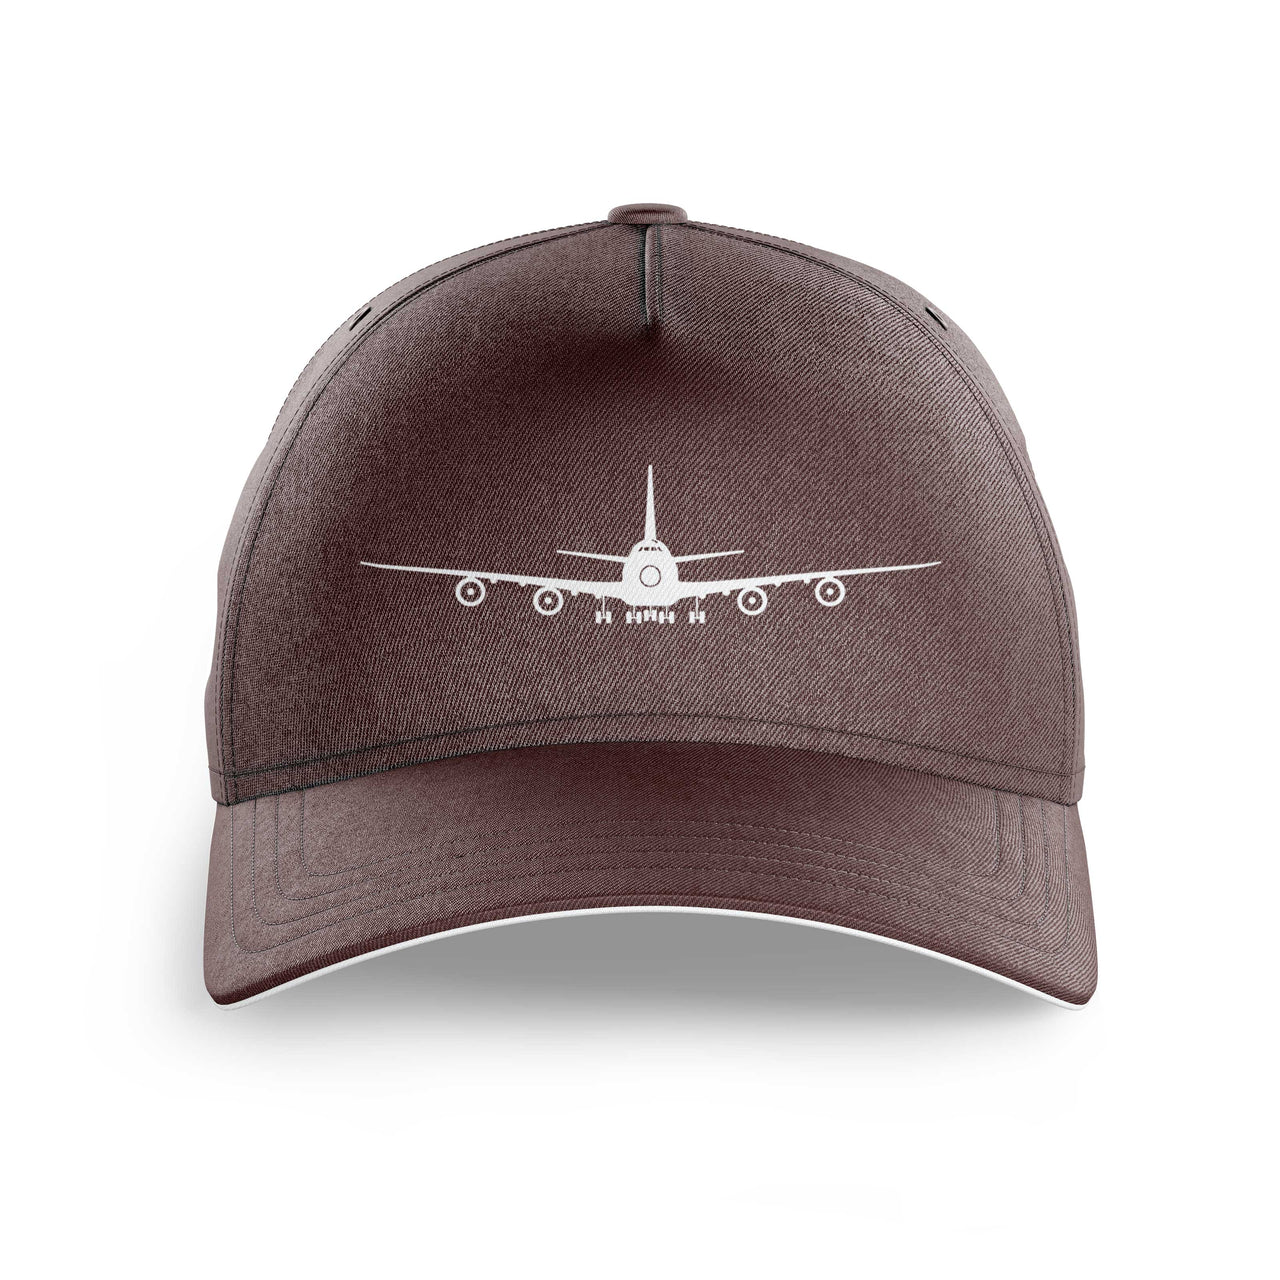 Boeing 747 Silhouette Printed Hats